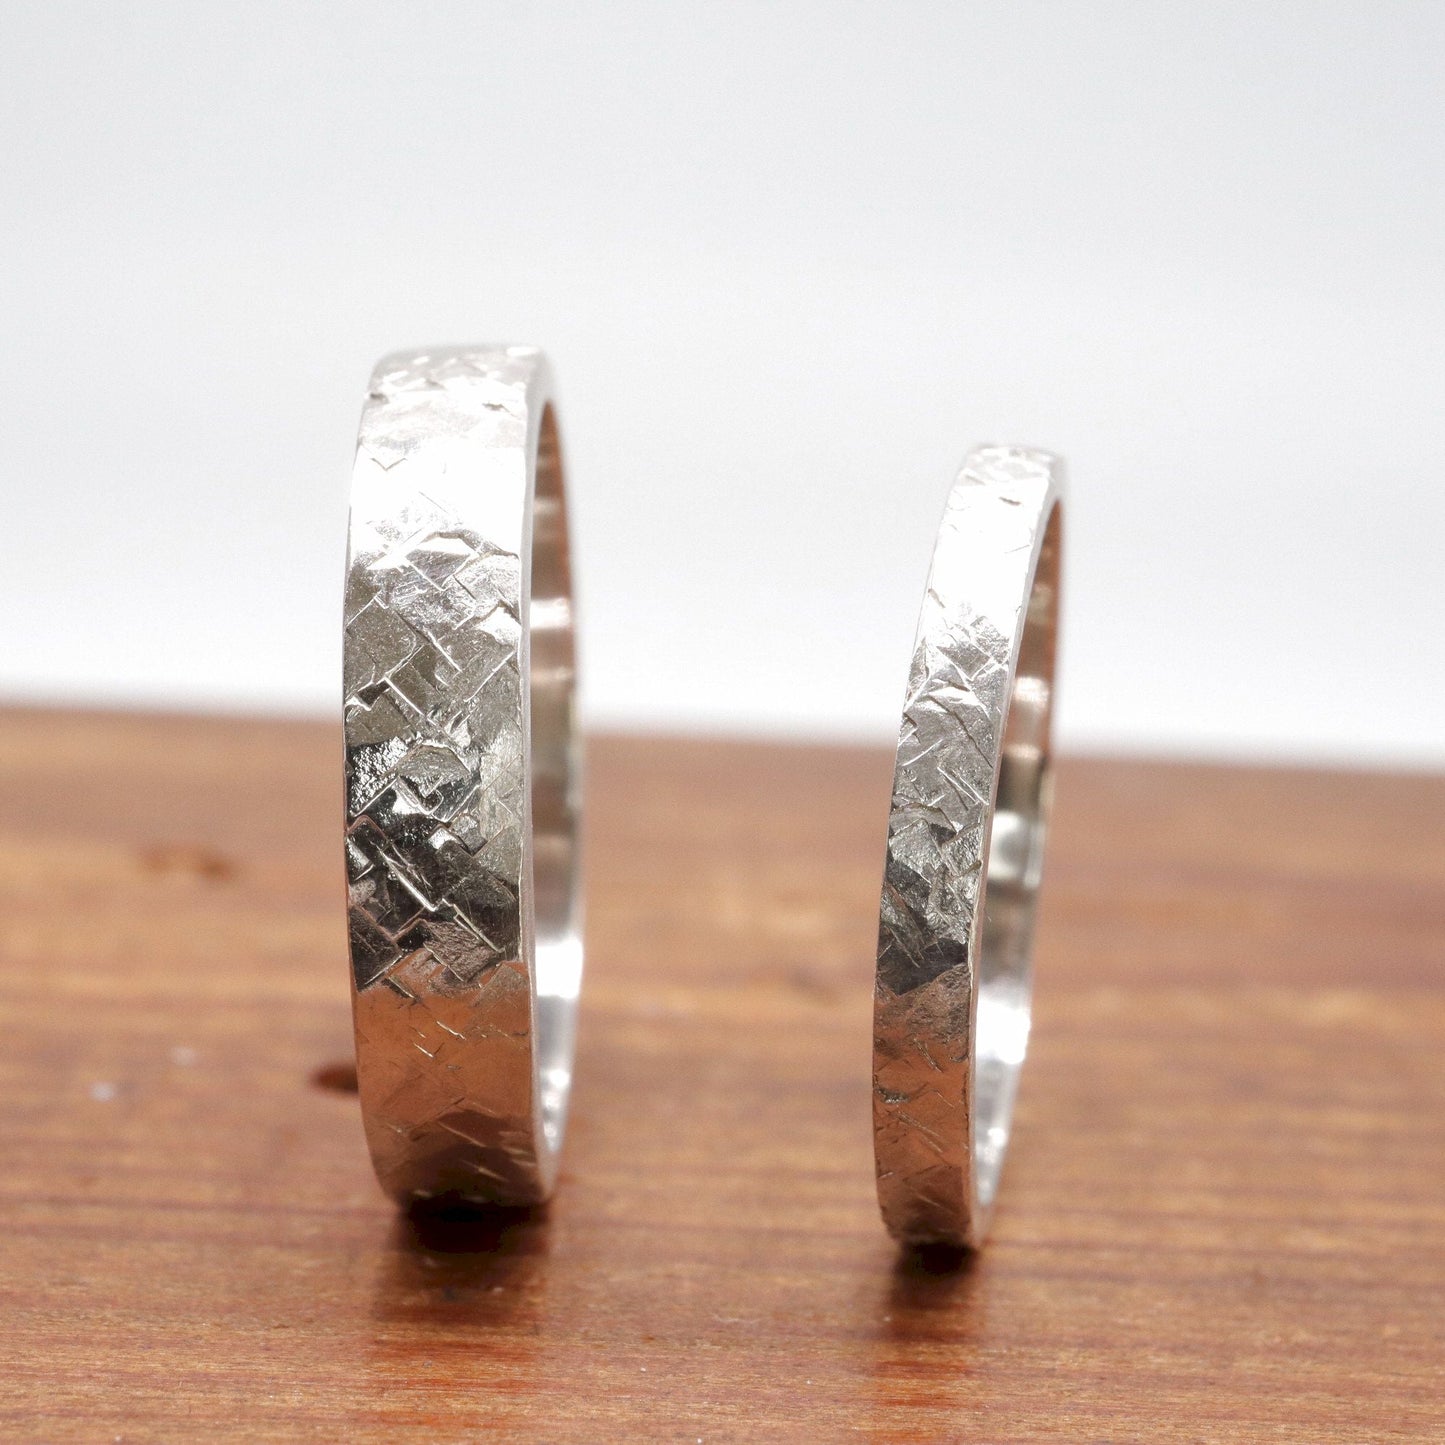 Silver matching Kendal rustic 2mm and 4mm wedding ring set - flat textured hammered design.